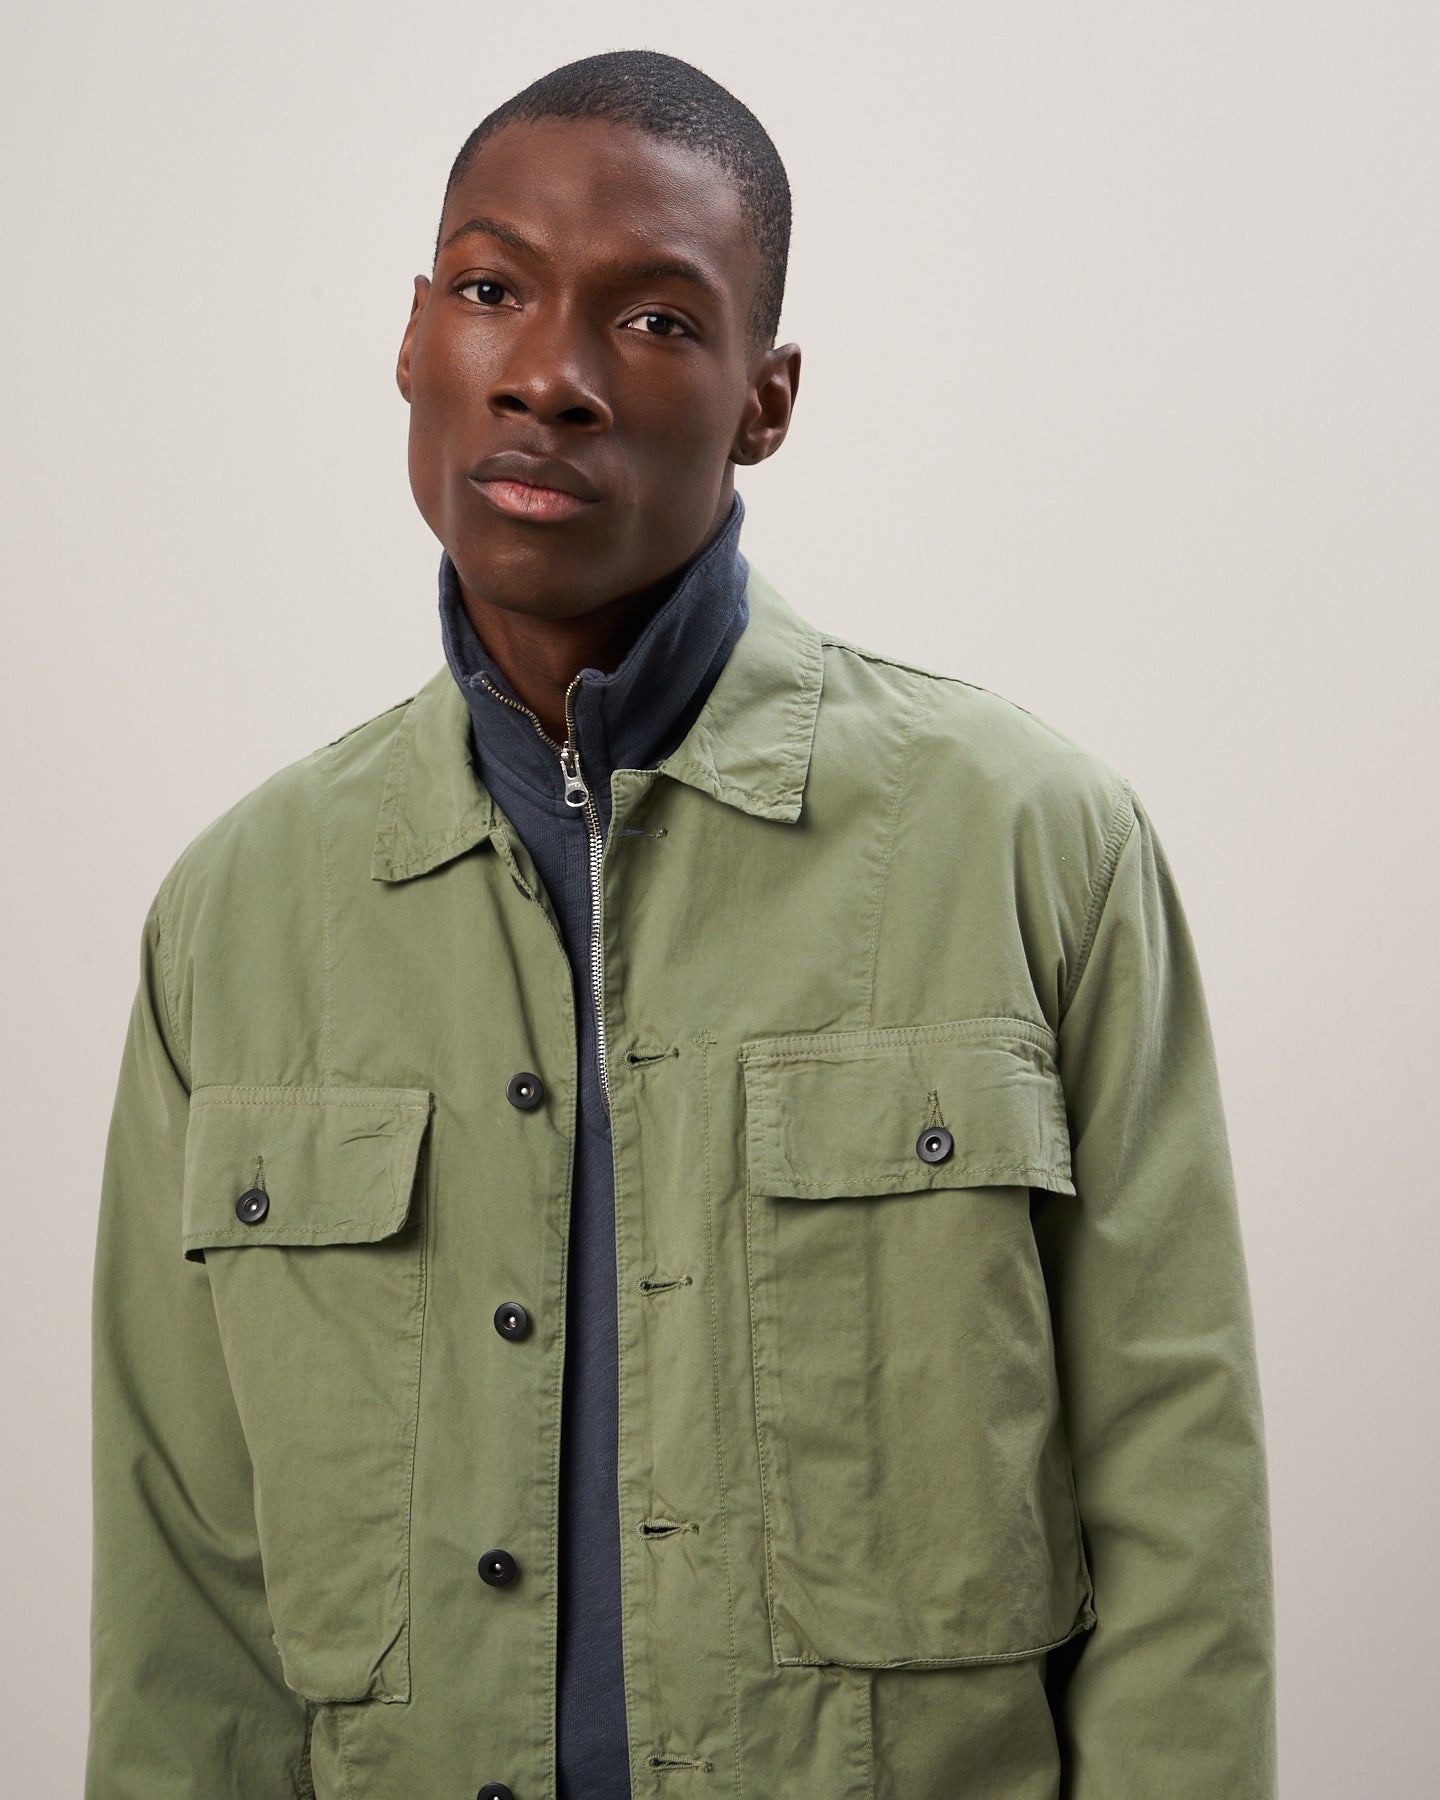 Veste Homme chino Vert militaire Darby BBE2121-02